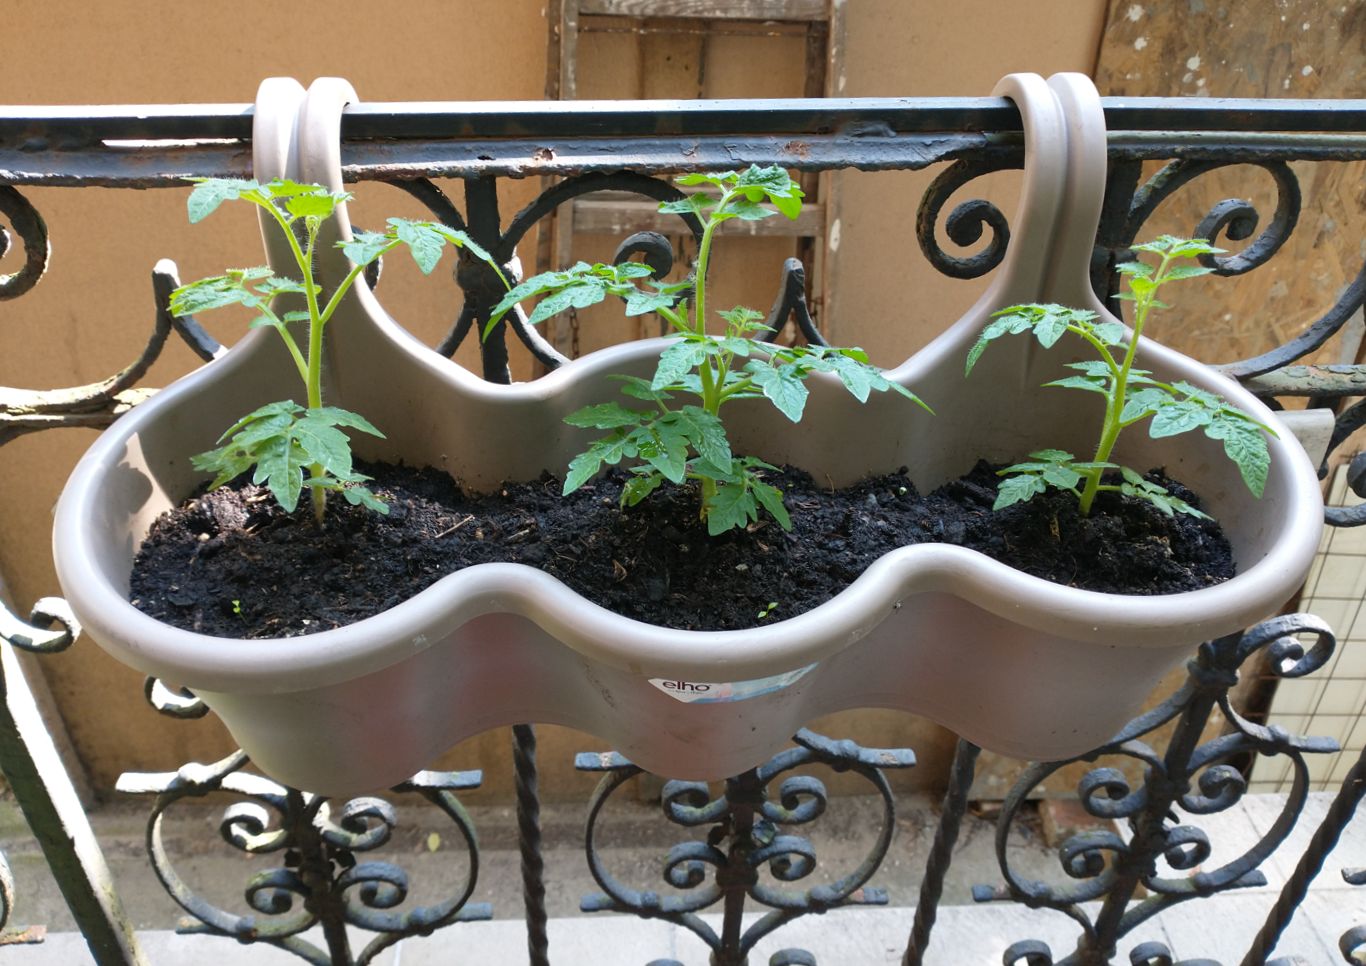 Three tomato plants in a hanging container.